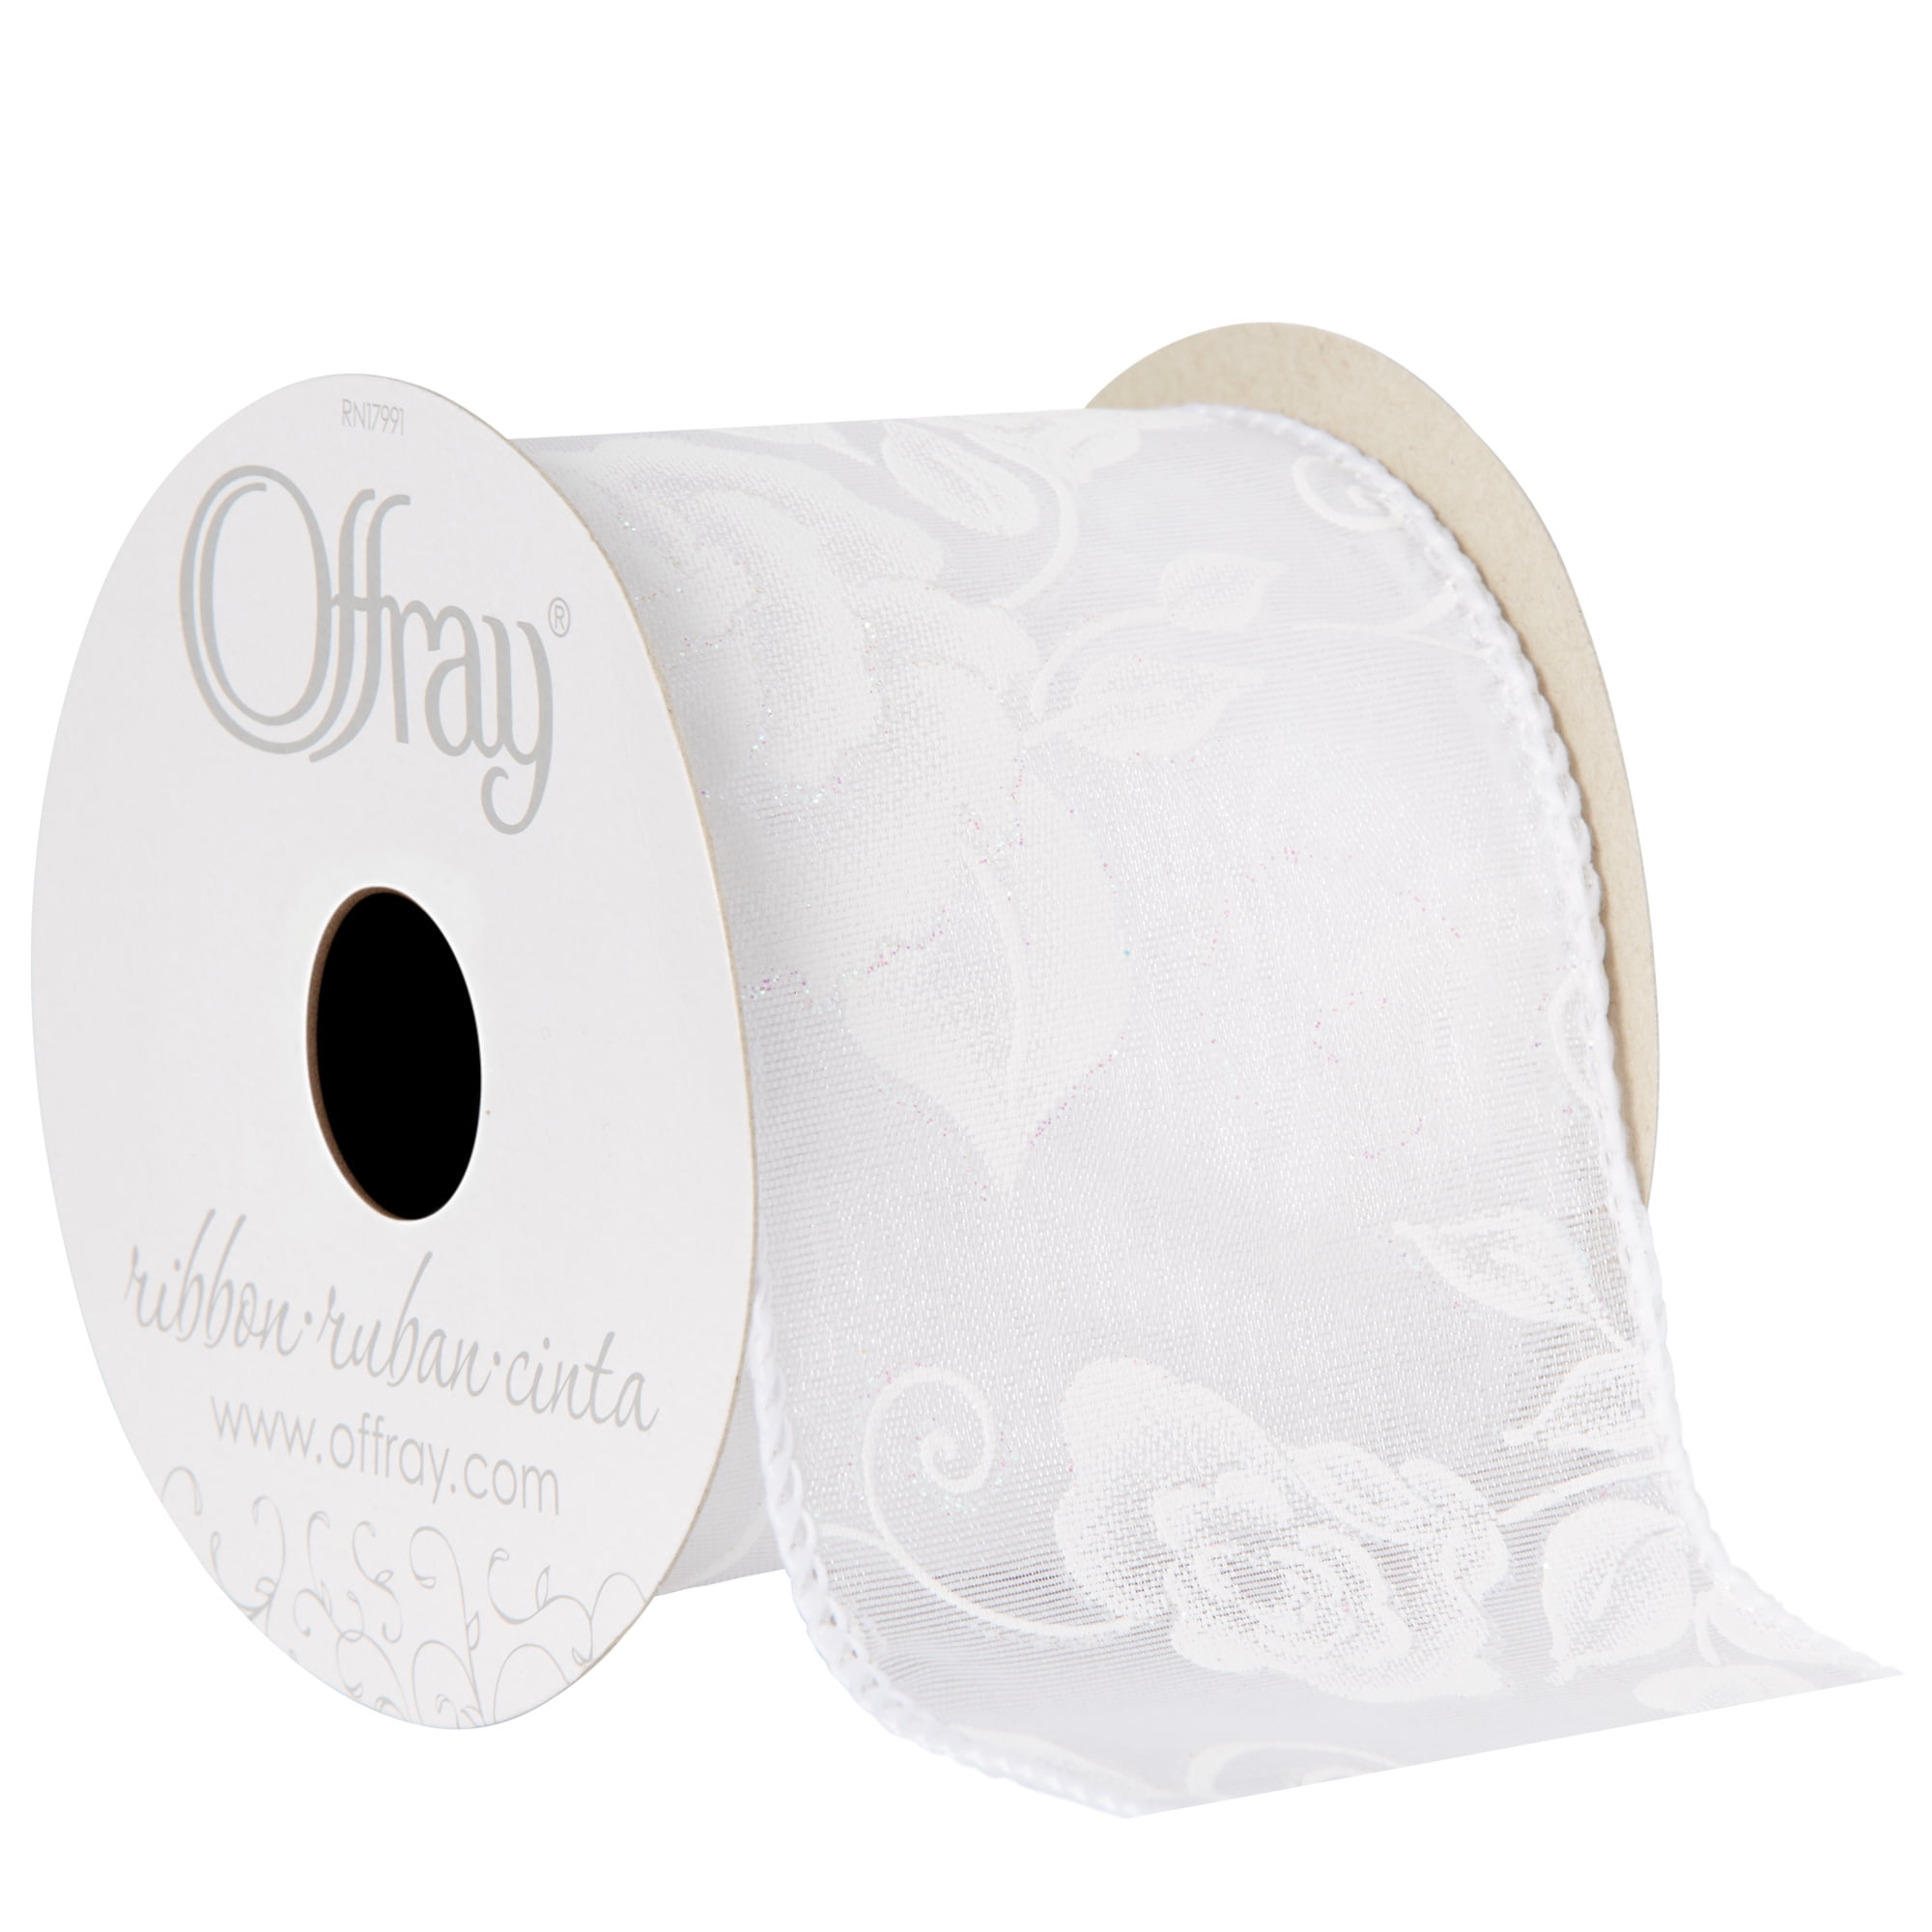 Offray Ribbon, White 2 1/2 inch Wired Rose Sheer Ribbon for Floral, Crafts, and Decor, 9 feet, 1 Each